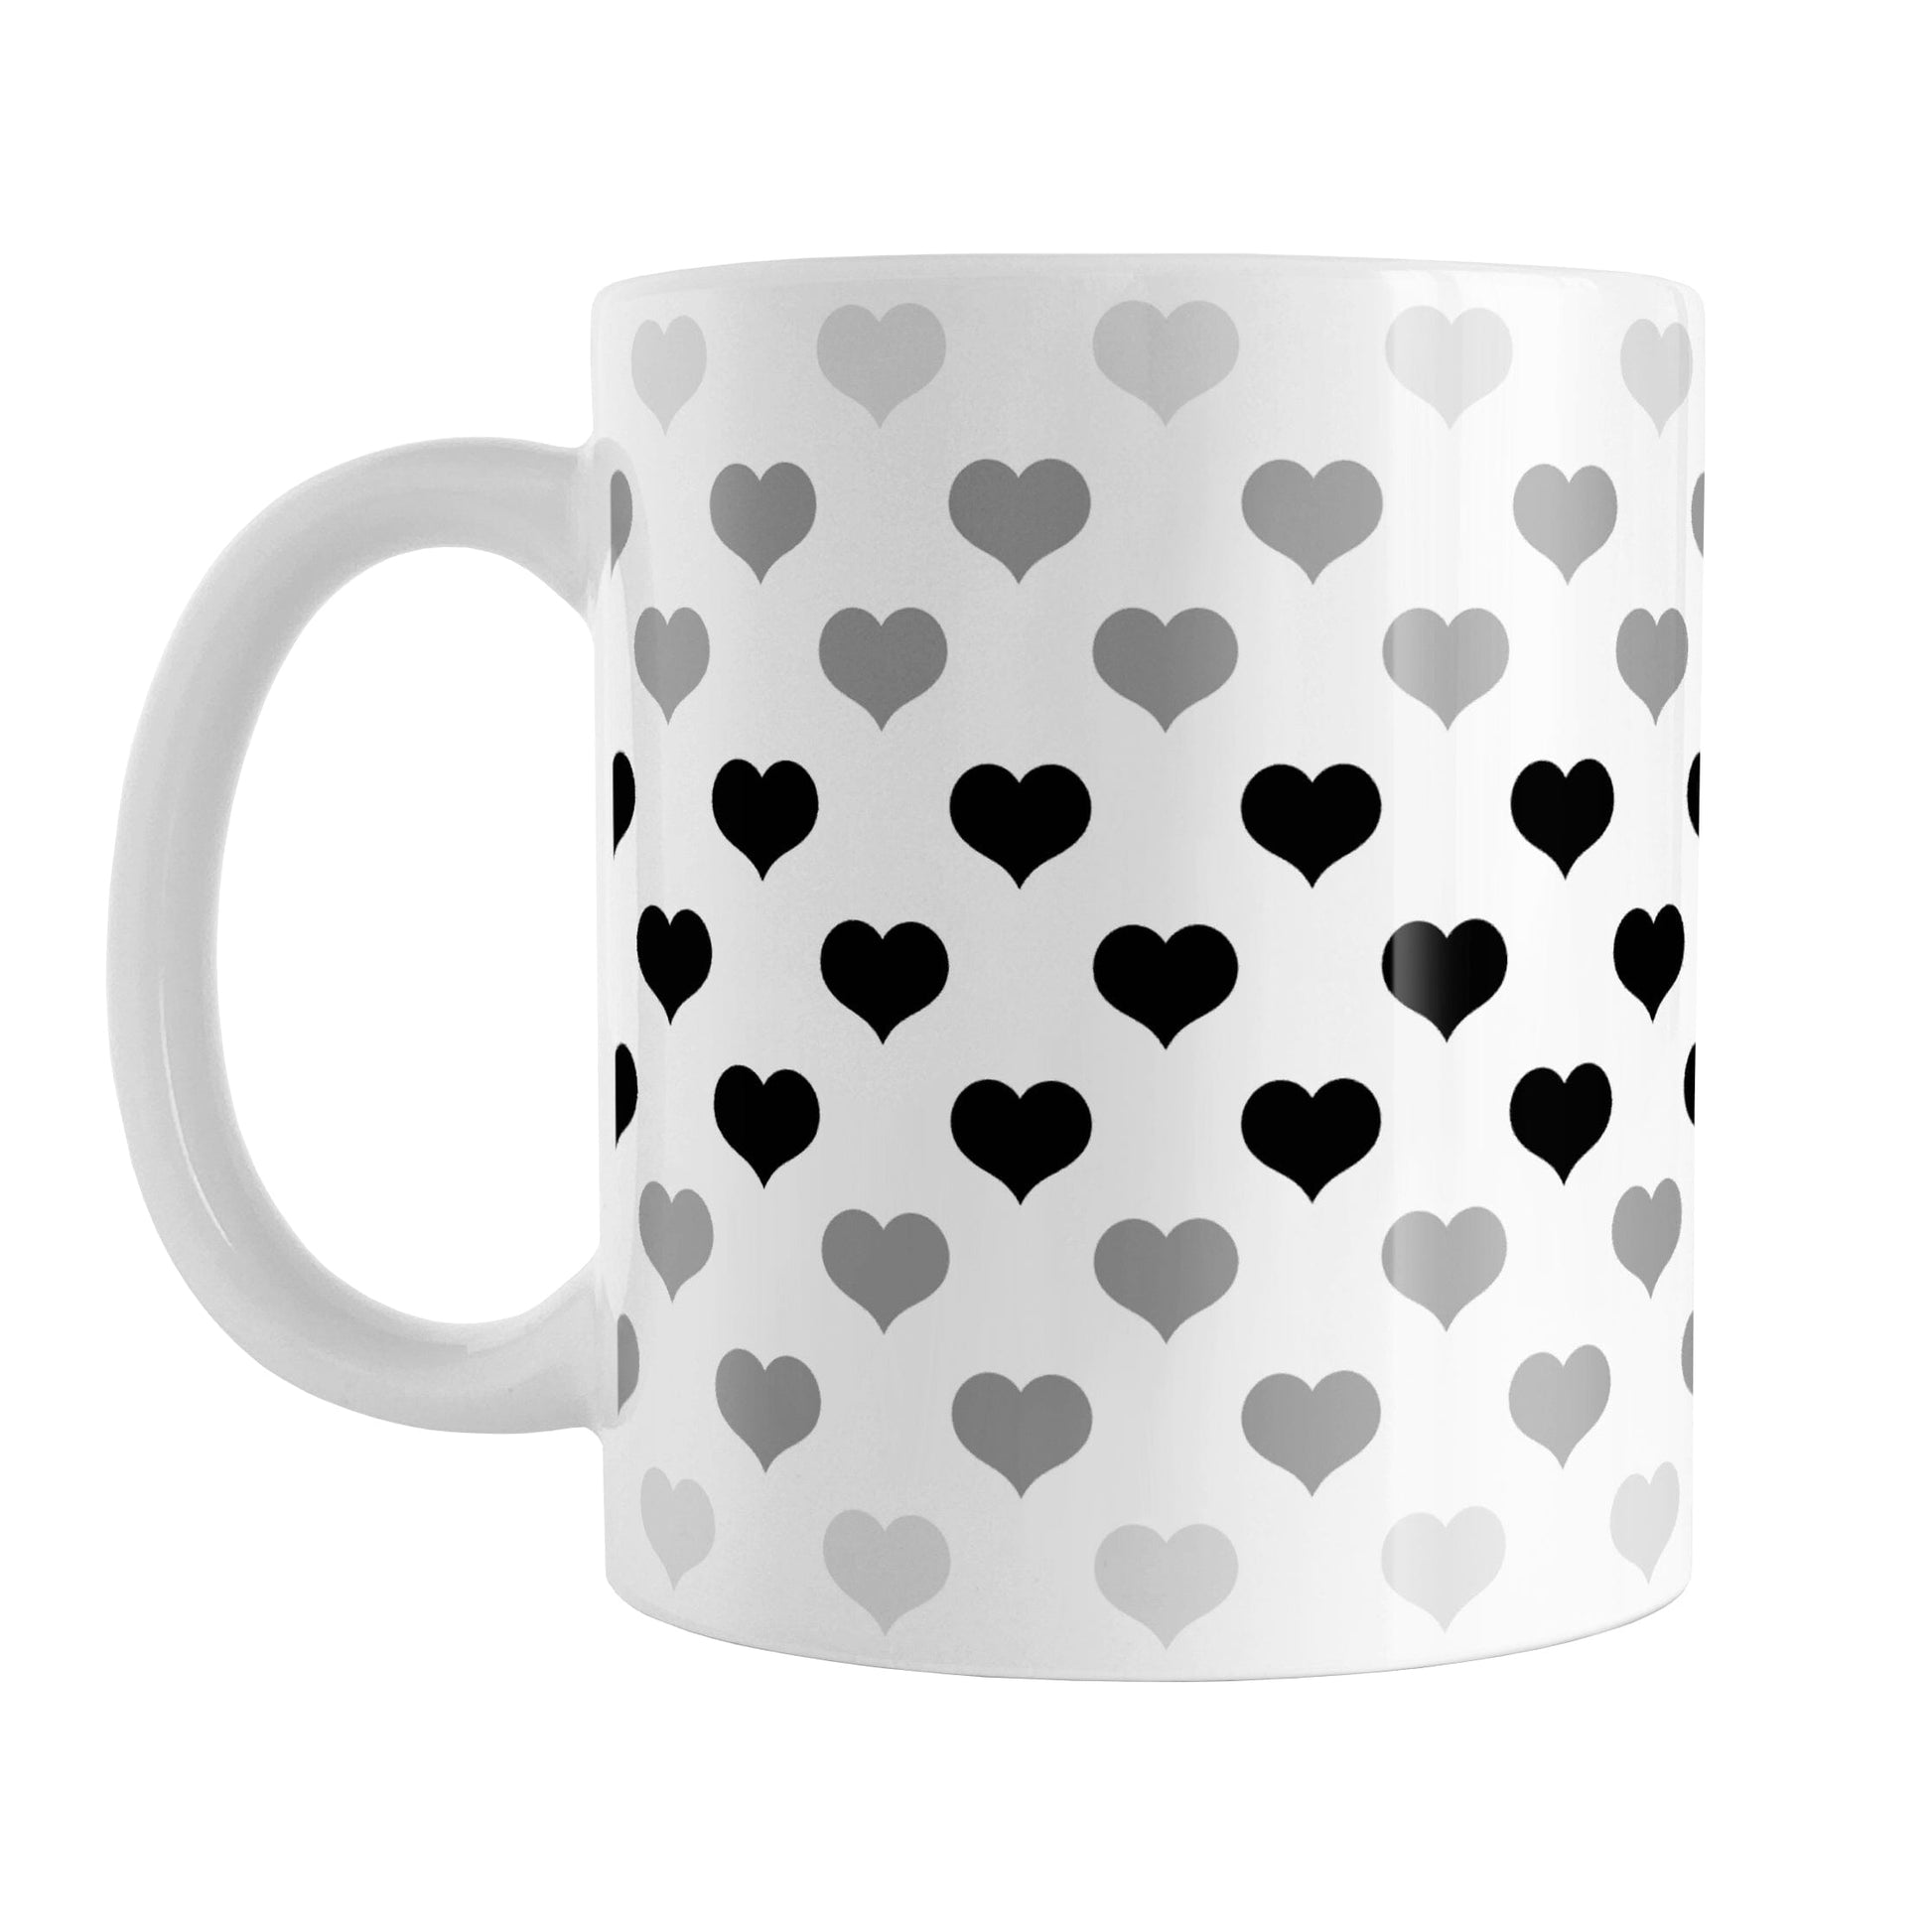 Hearts in Black Mug (11oz) at Amy's Coffee Mugs. A ceramic coffee mug designed with hearts in different shades of black and gray, with black across the middle and the lighter gray along the top and bottom, in a pattern that wraps around the mug to the handle. 